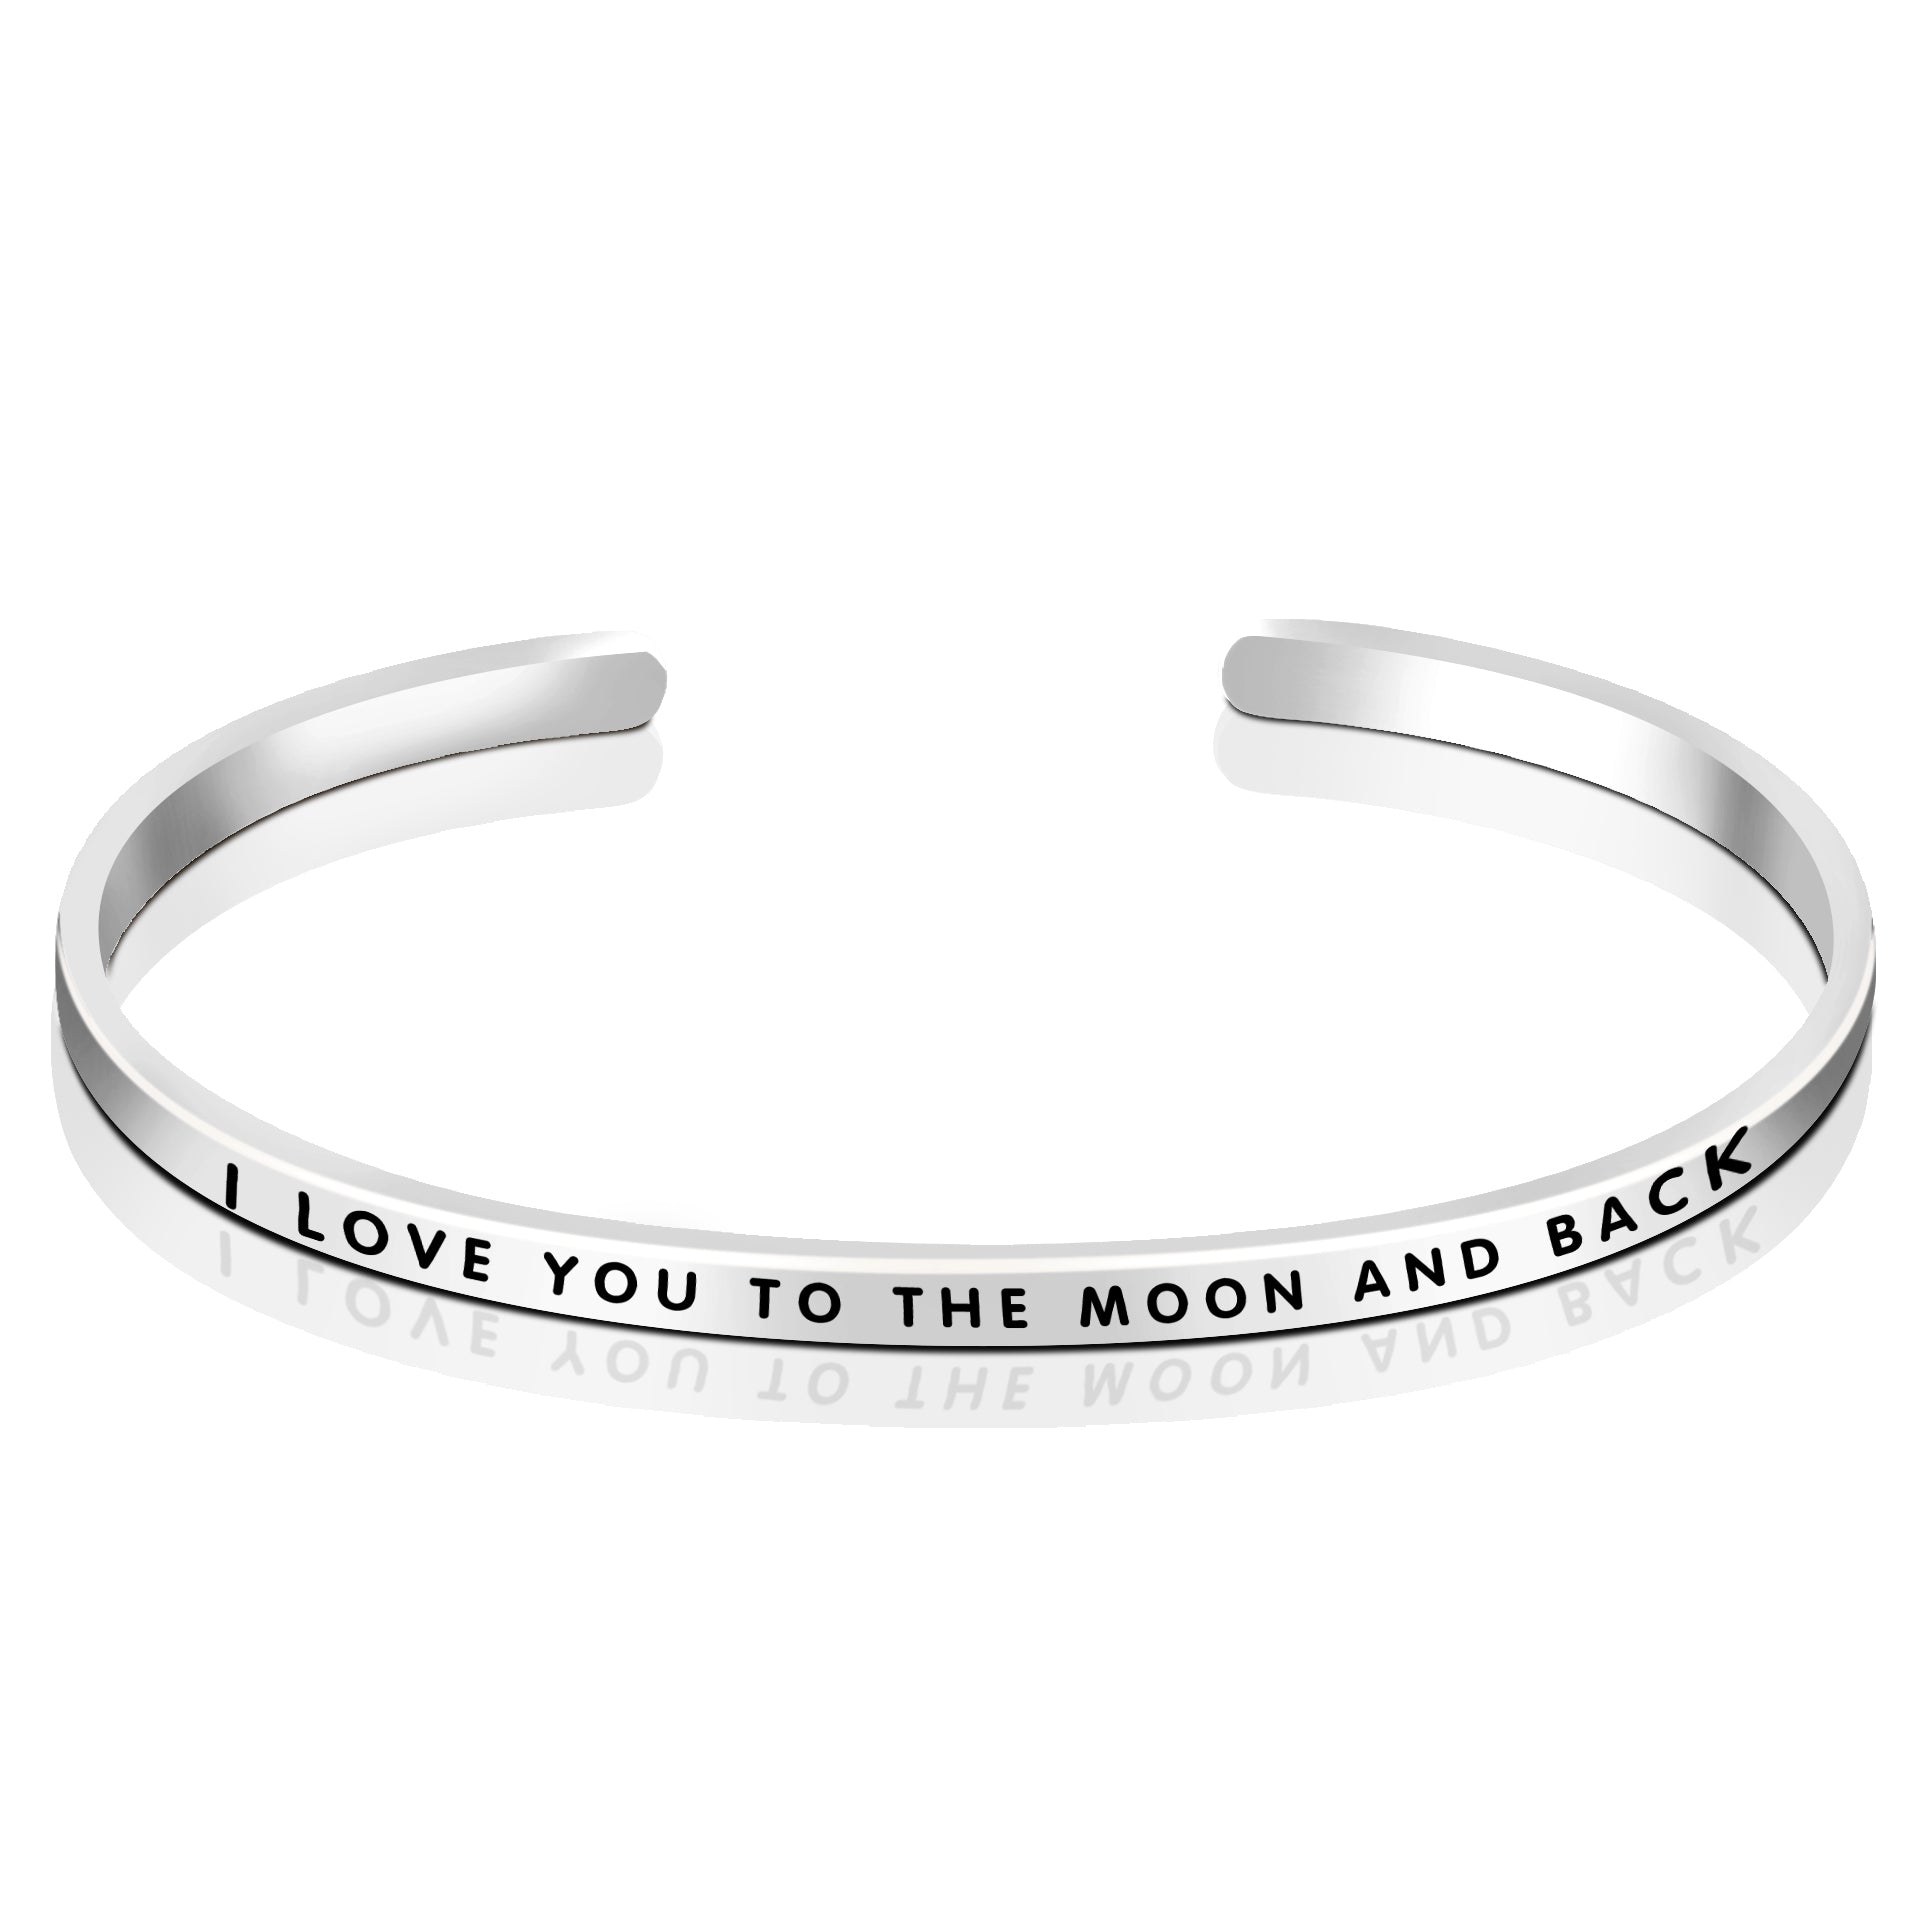 I LOVE YOU TO THE MOON AND THE BACK Bangle Words Engraved Copper Bangle